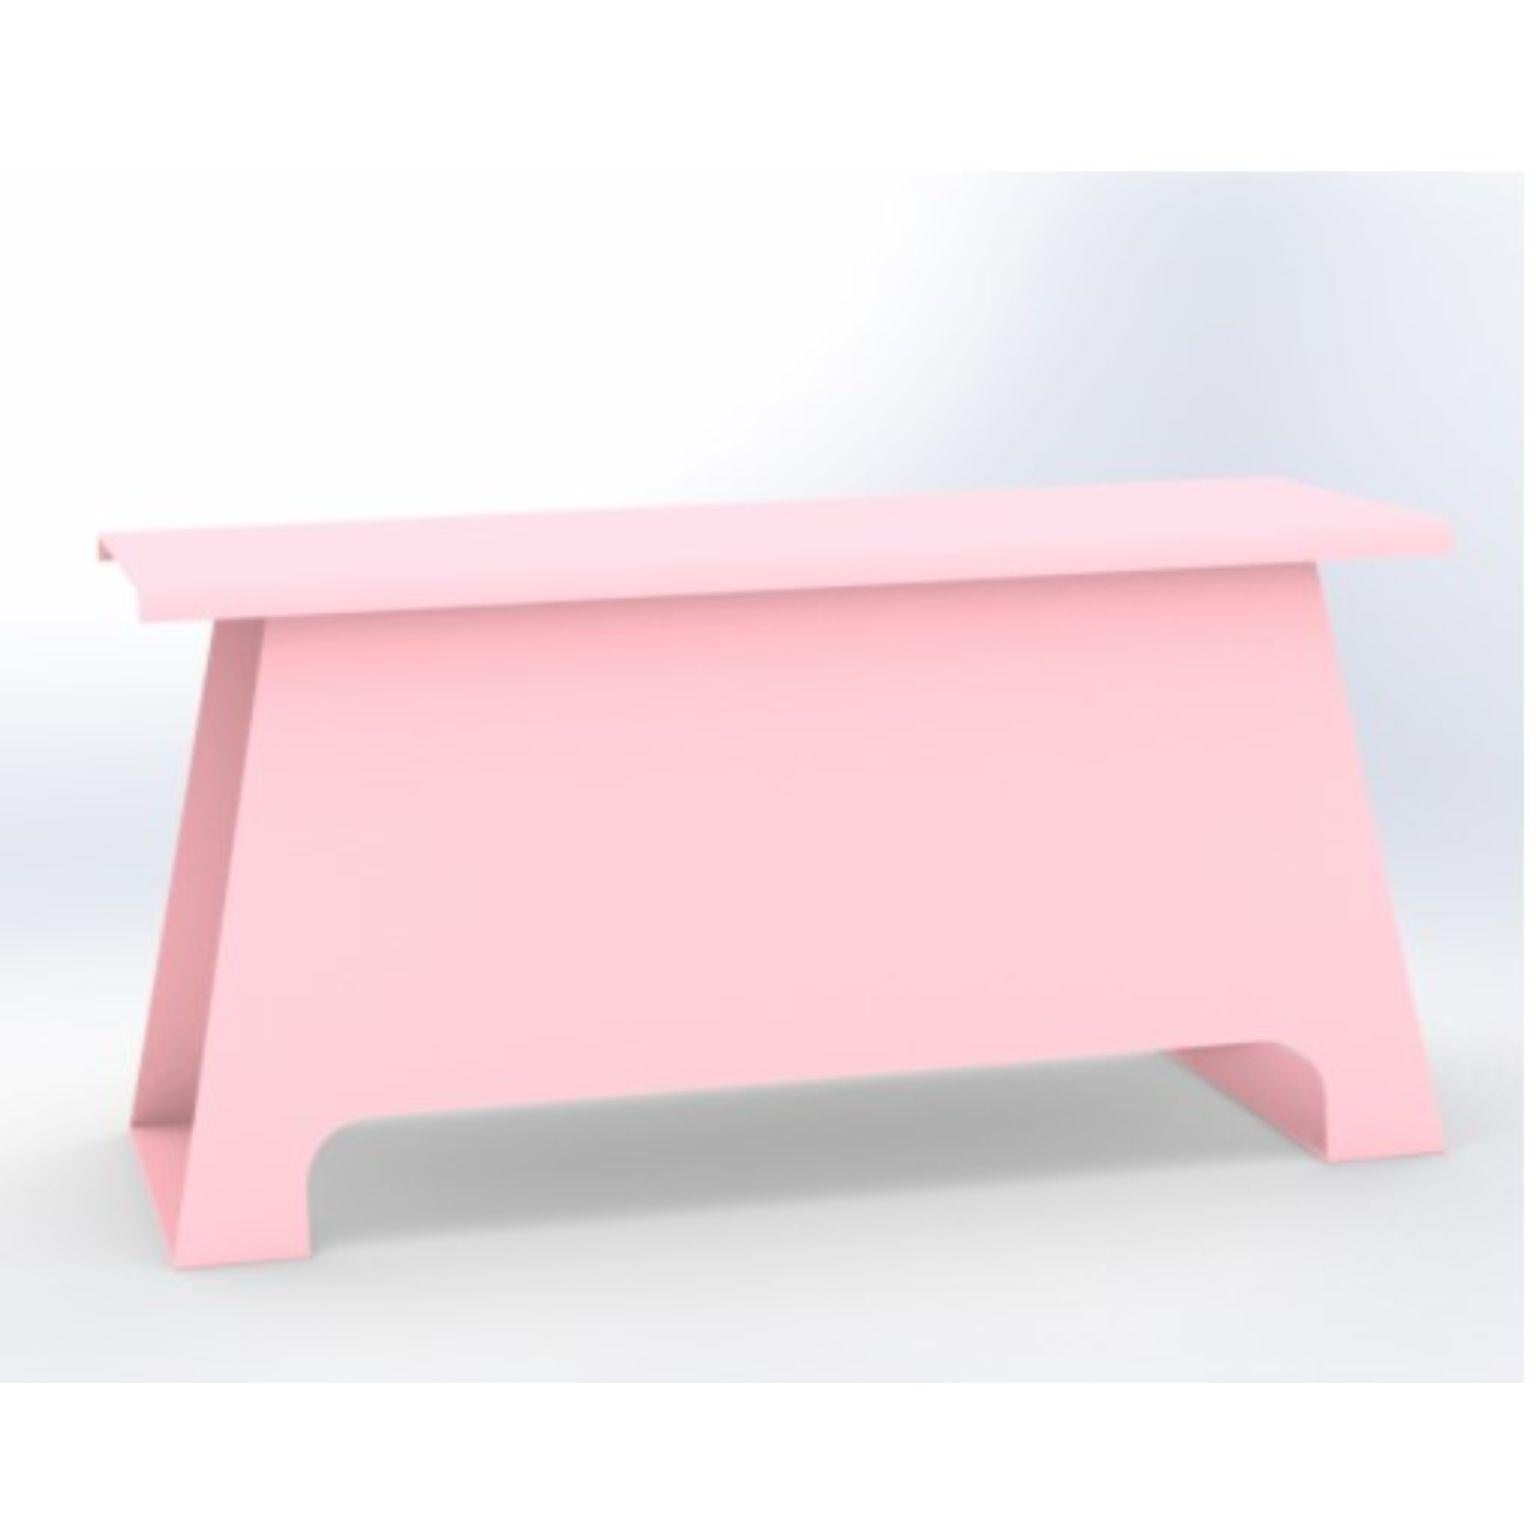 The old school 100 pink bench by Harm De Veer
Dimensions: D 100 x W 40 x H 50 cm
Materials: steel - thermolytic galvanizing - powdercoating - coating
Weight: 42 kg
Also available in various colours and sizes. 

The Old school is based on the